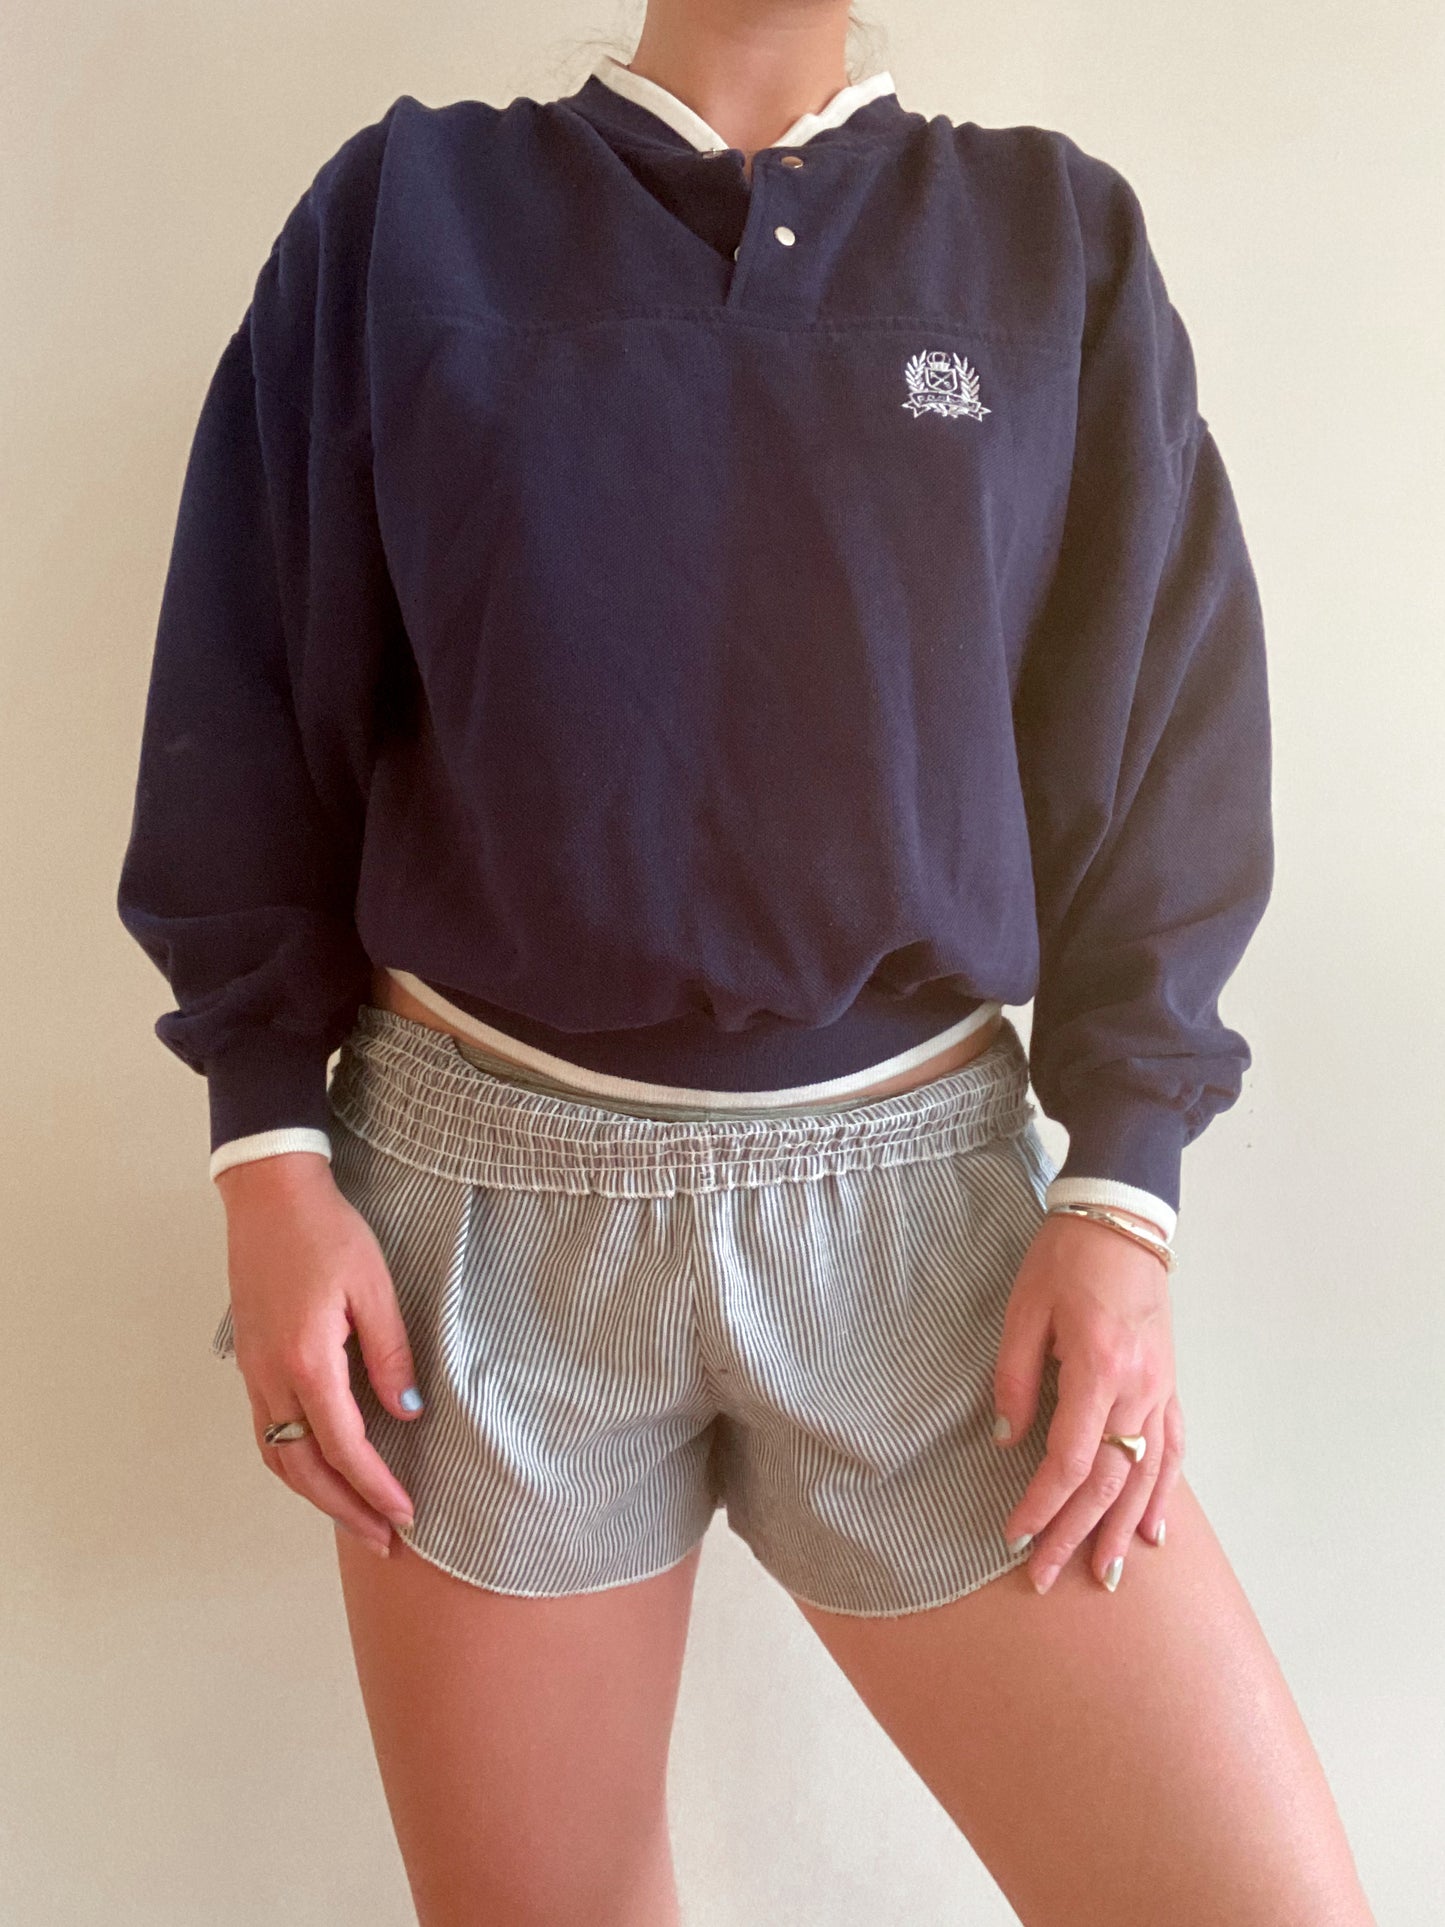 Vintage Navy and Crest Pullover